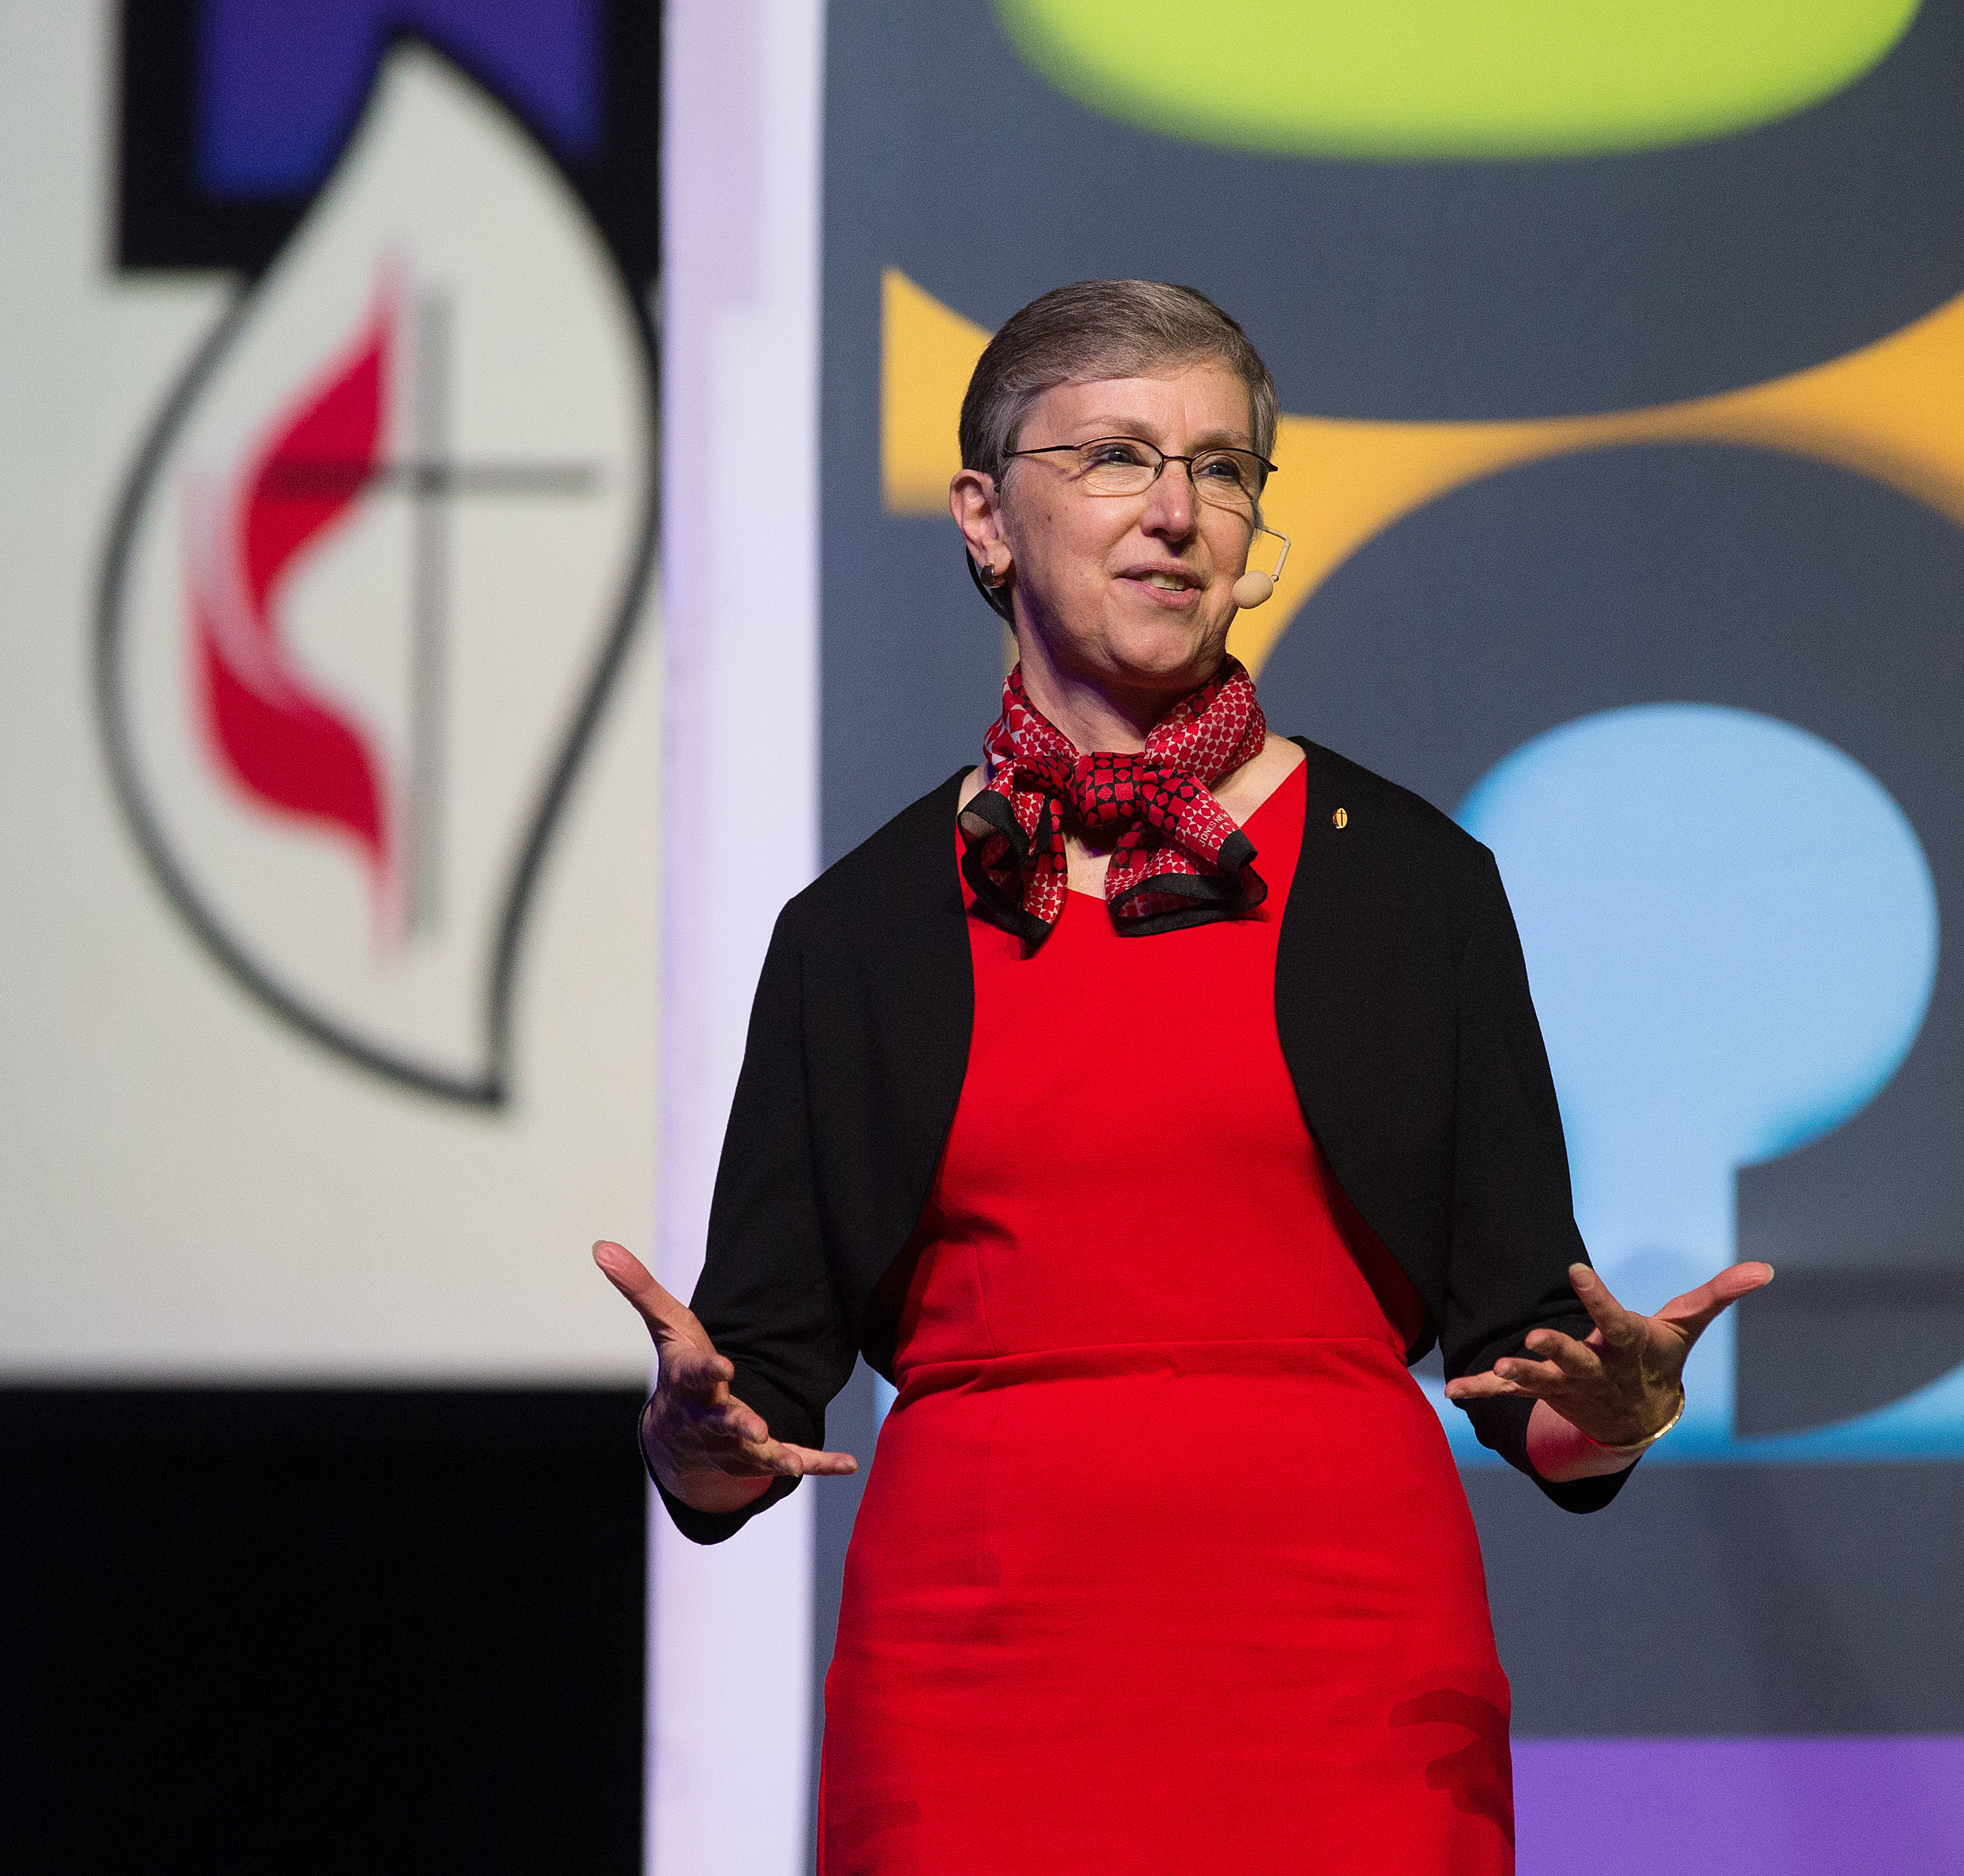 Harriett Olson helps lead the 150th anniversary celebration for United Methodist Women during the 2016 United Methodist General Conference in Portland, Ore. Olson is the chief executive of United Methodist Women. Photo by Mike DuBose, UMNS.